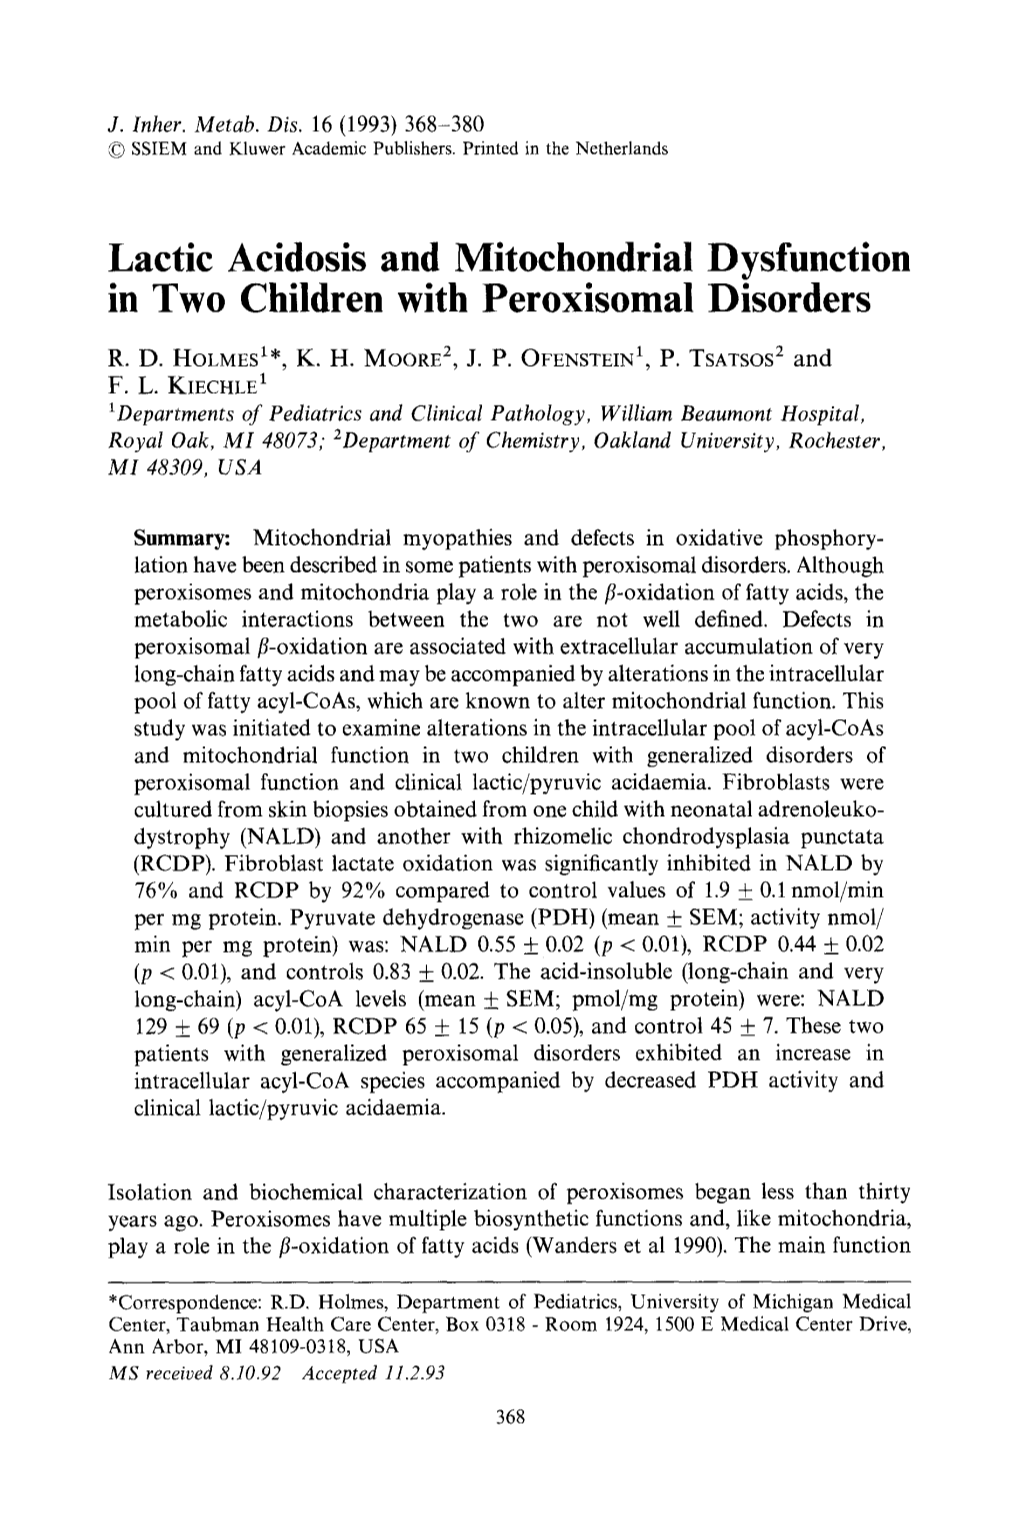 Lactic Acidosis and Mitochondrial Dysfunction in Two Children with Peroxisomal Disorders